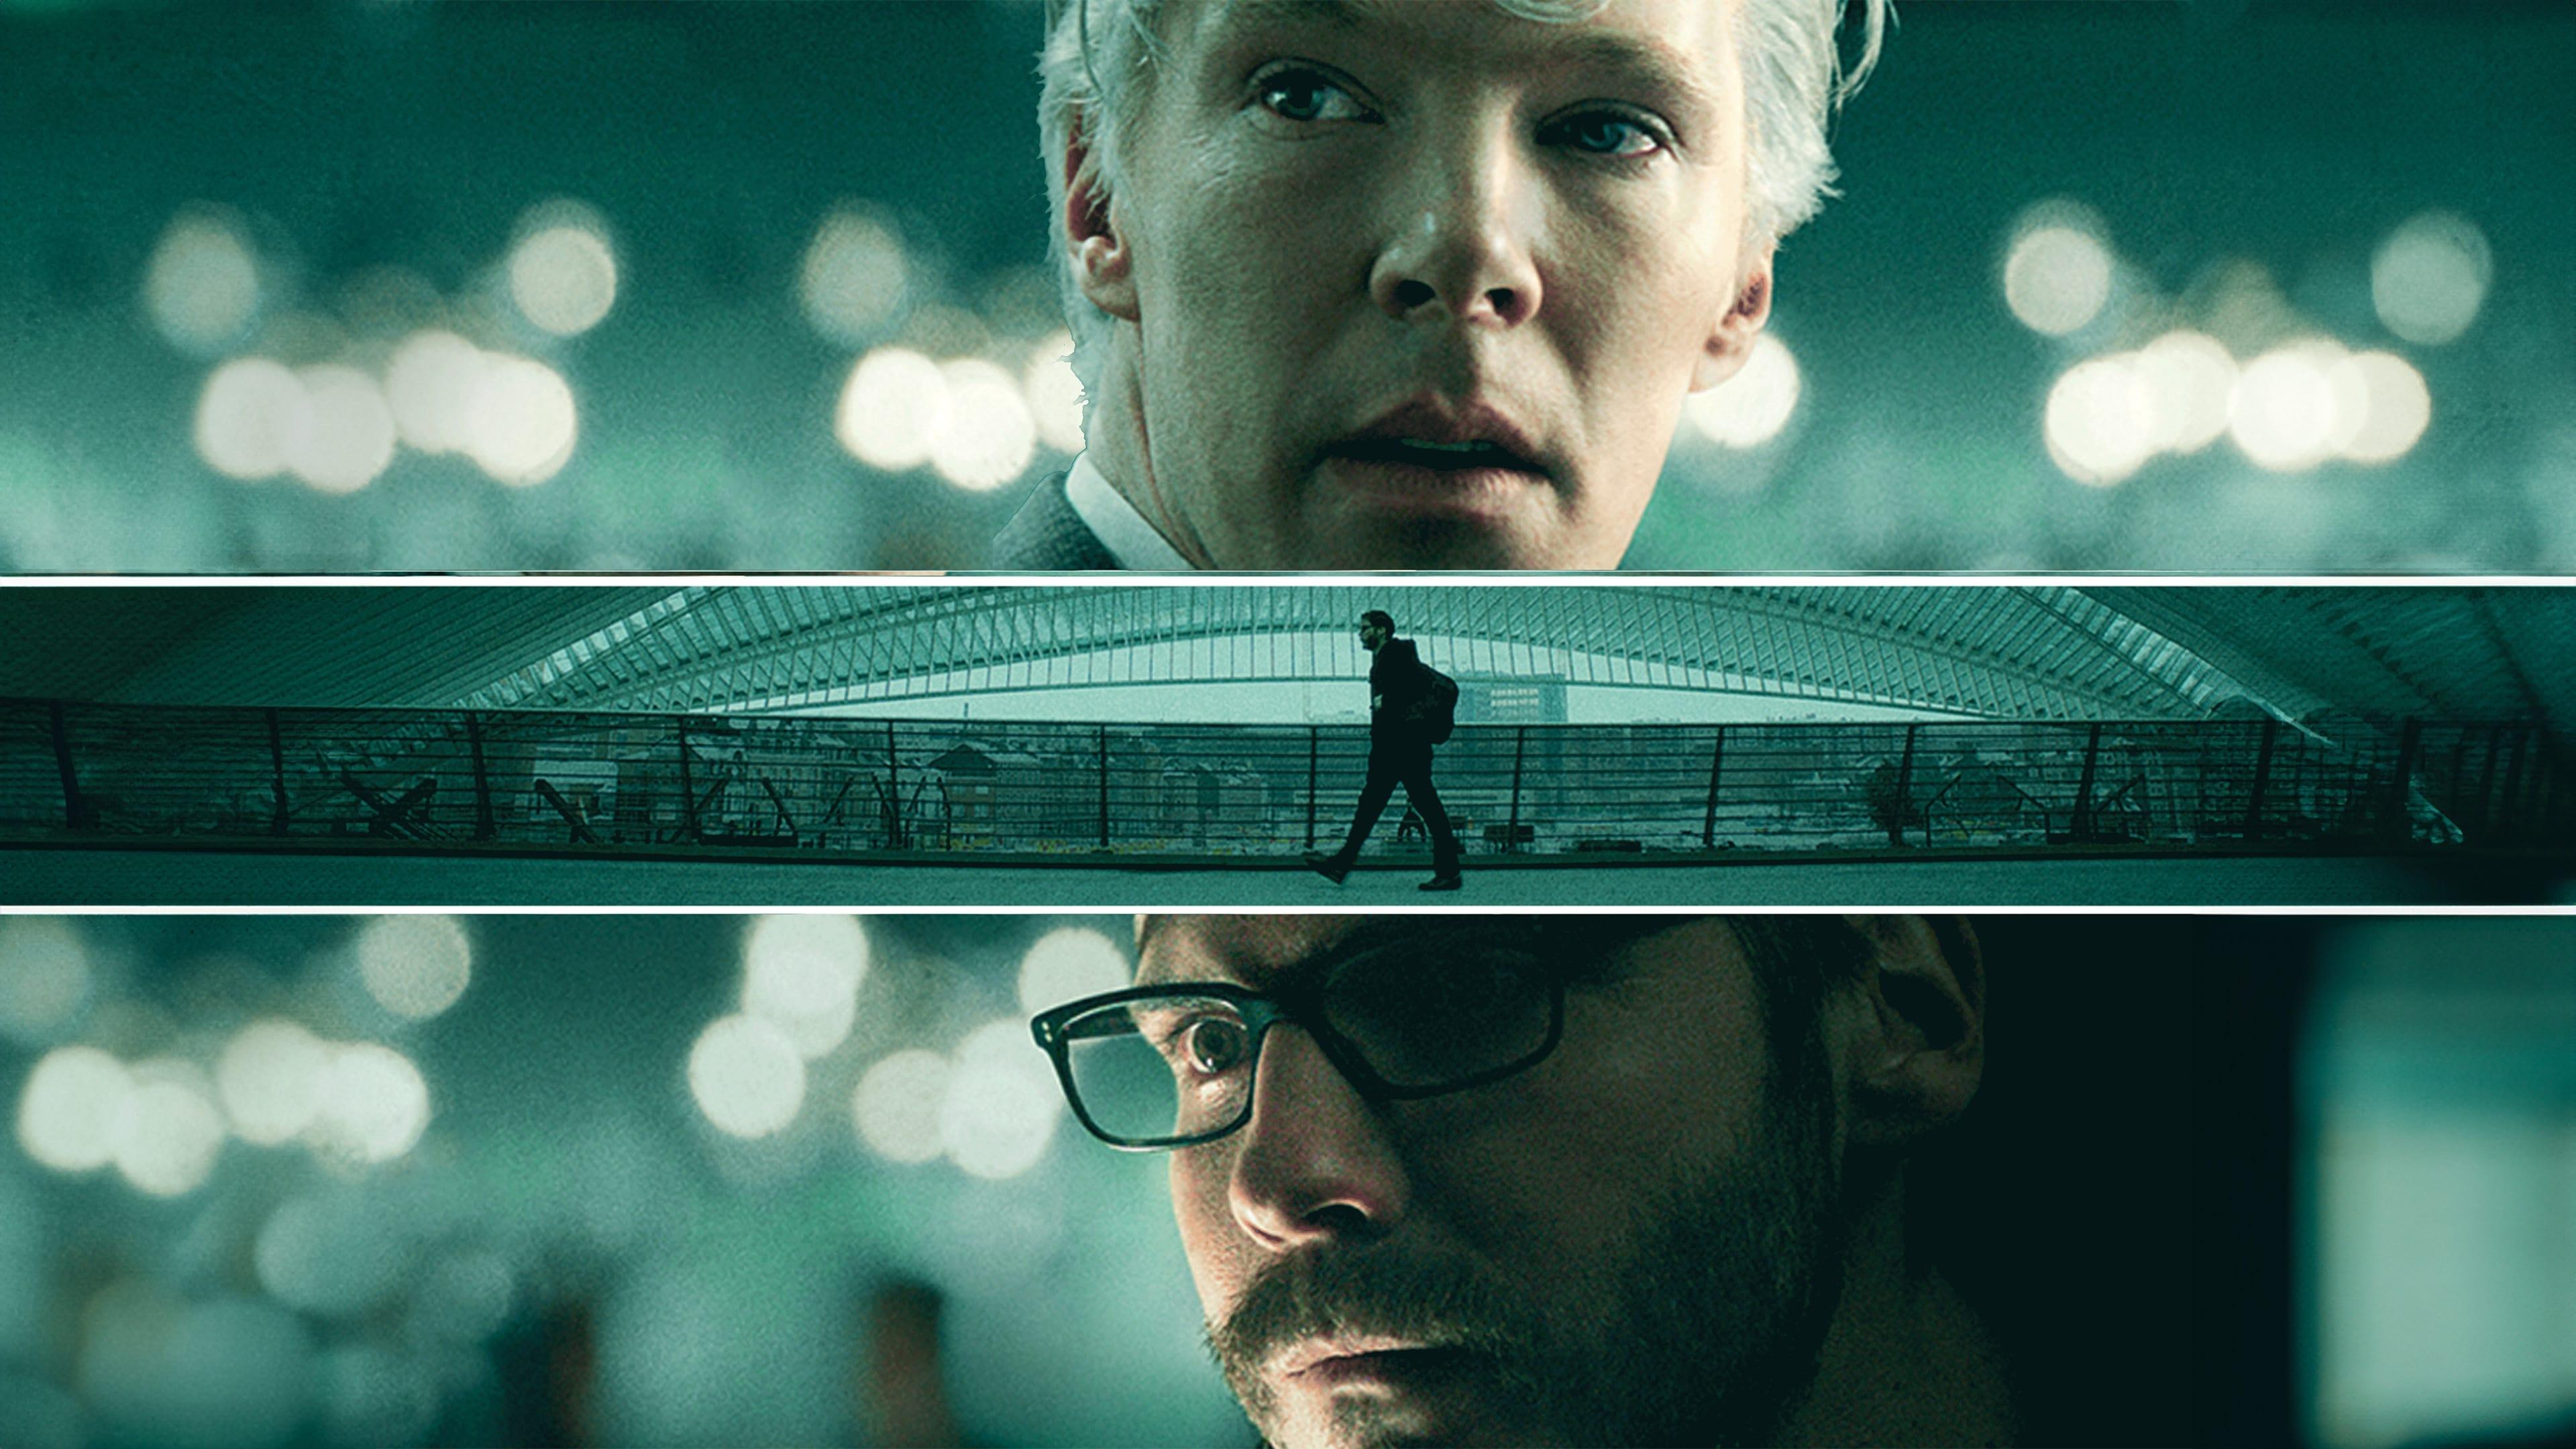 The Fifth Estate backdrop